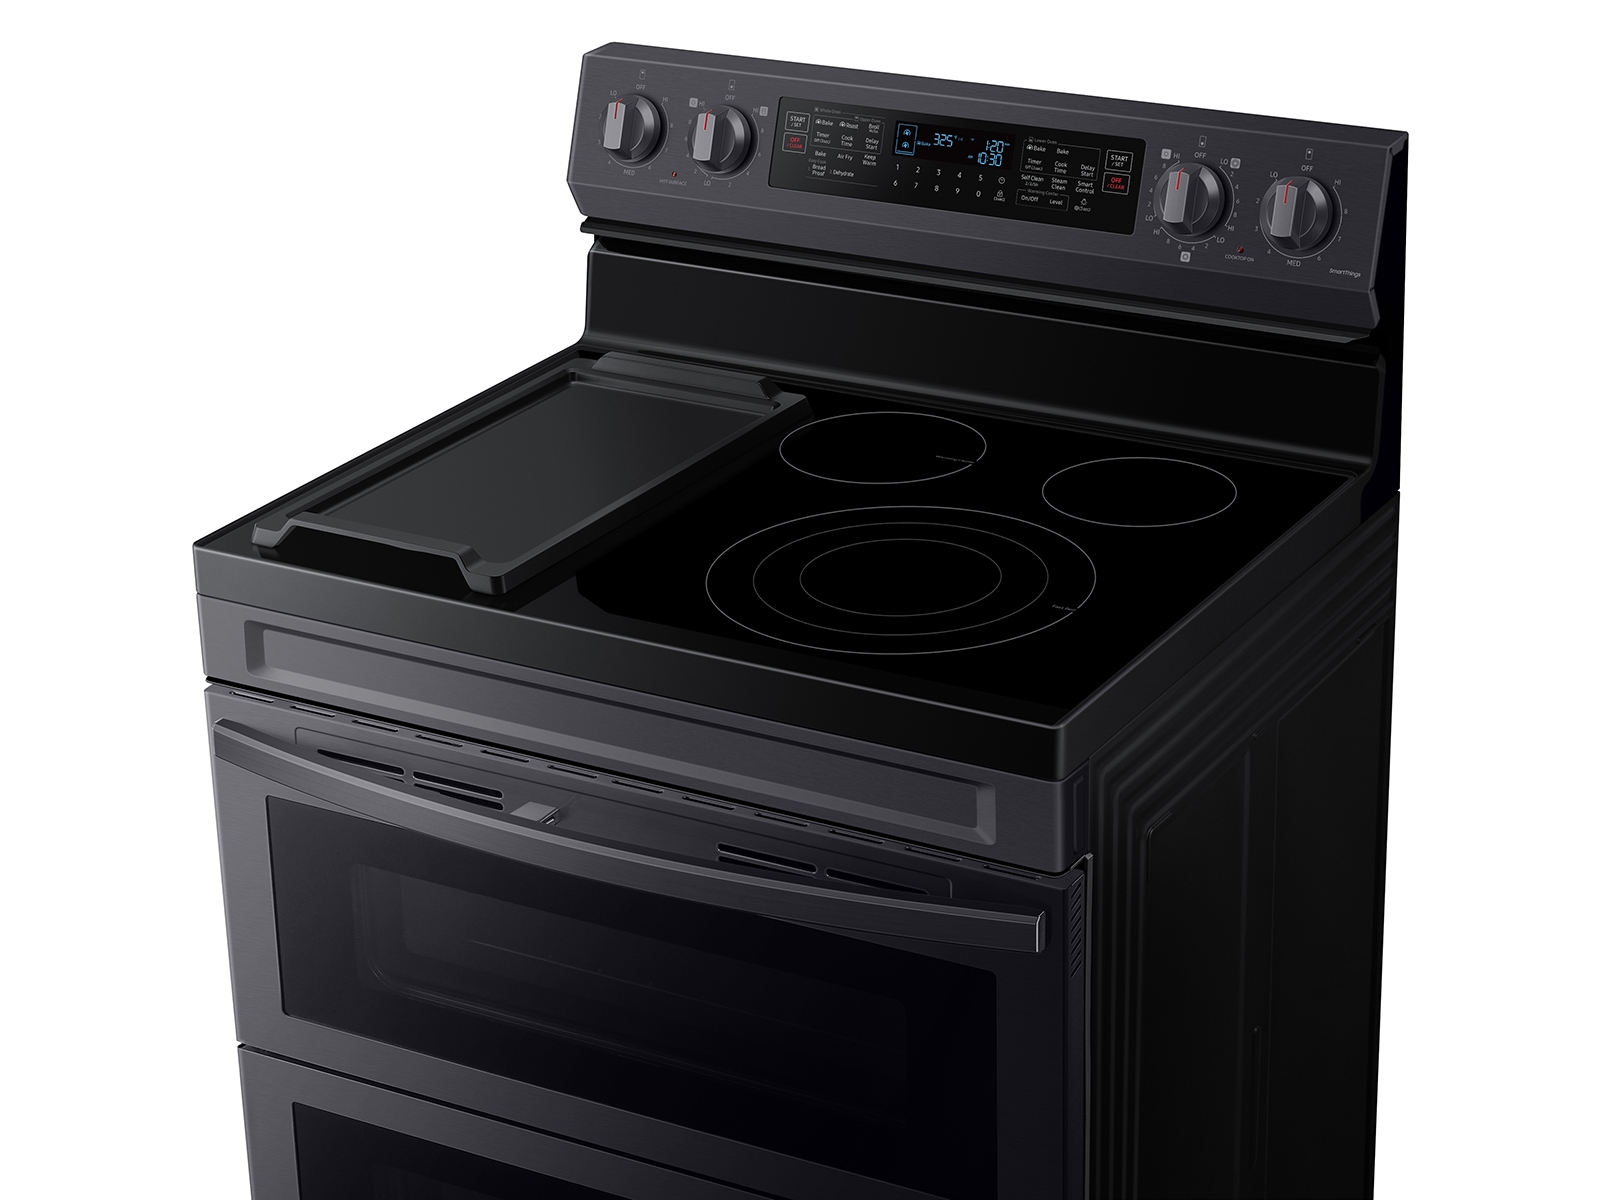 NE63A6751SS Samsung 6.3 cu. ft. Smart Freestanding Electric Range with Flex  Duo™, No-Preheat Air Fry & Griddle in Stainless Steel